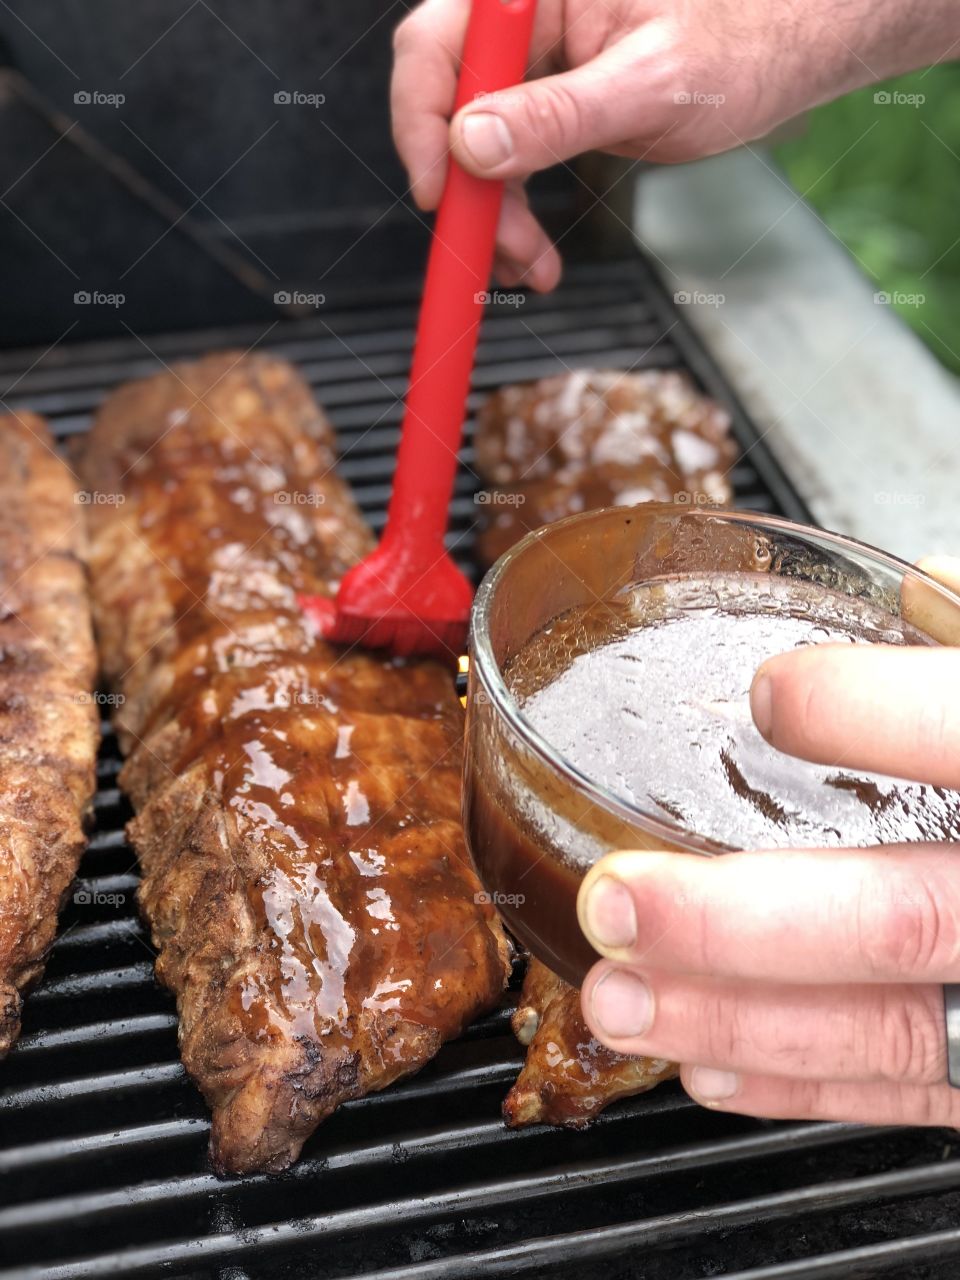 Ribs being brushed with barbecue sauce. Backyard Barbecue.